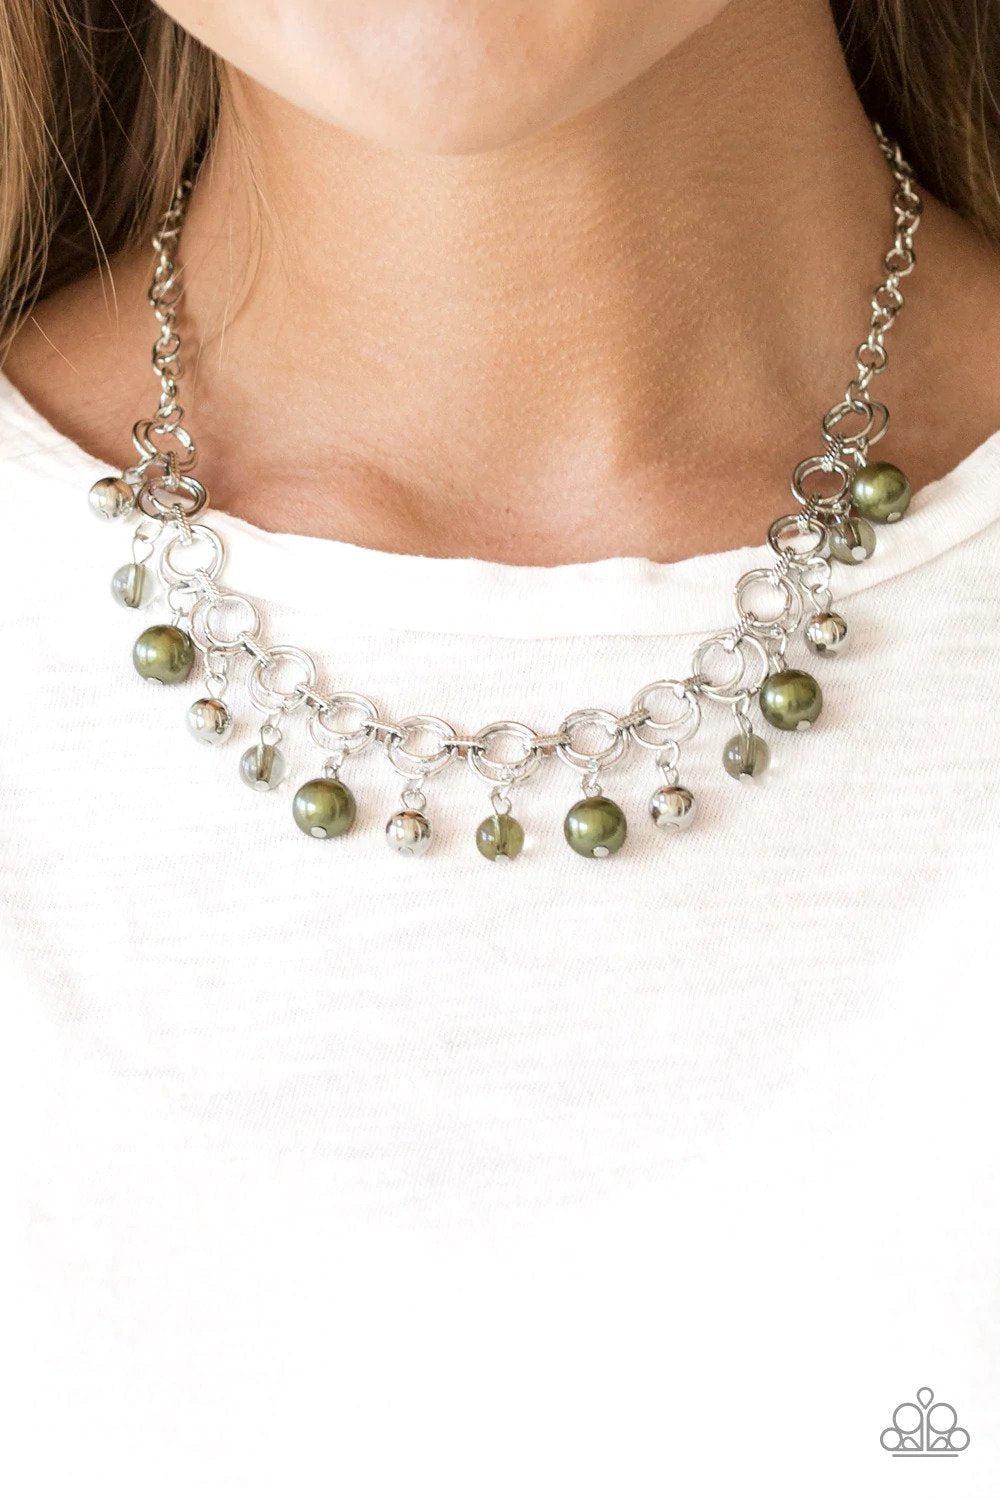 Fiercely Fancy Green Necklace - Paparazzi Accessories- on model - CarasShop.com - $5 Jewelry by Cara Jewels